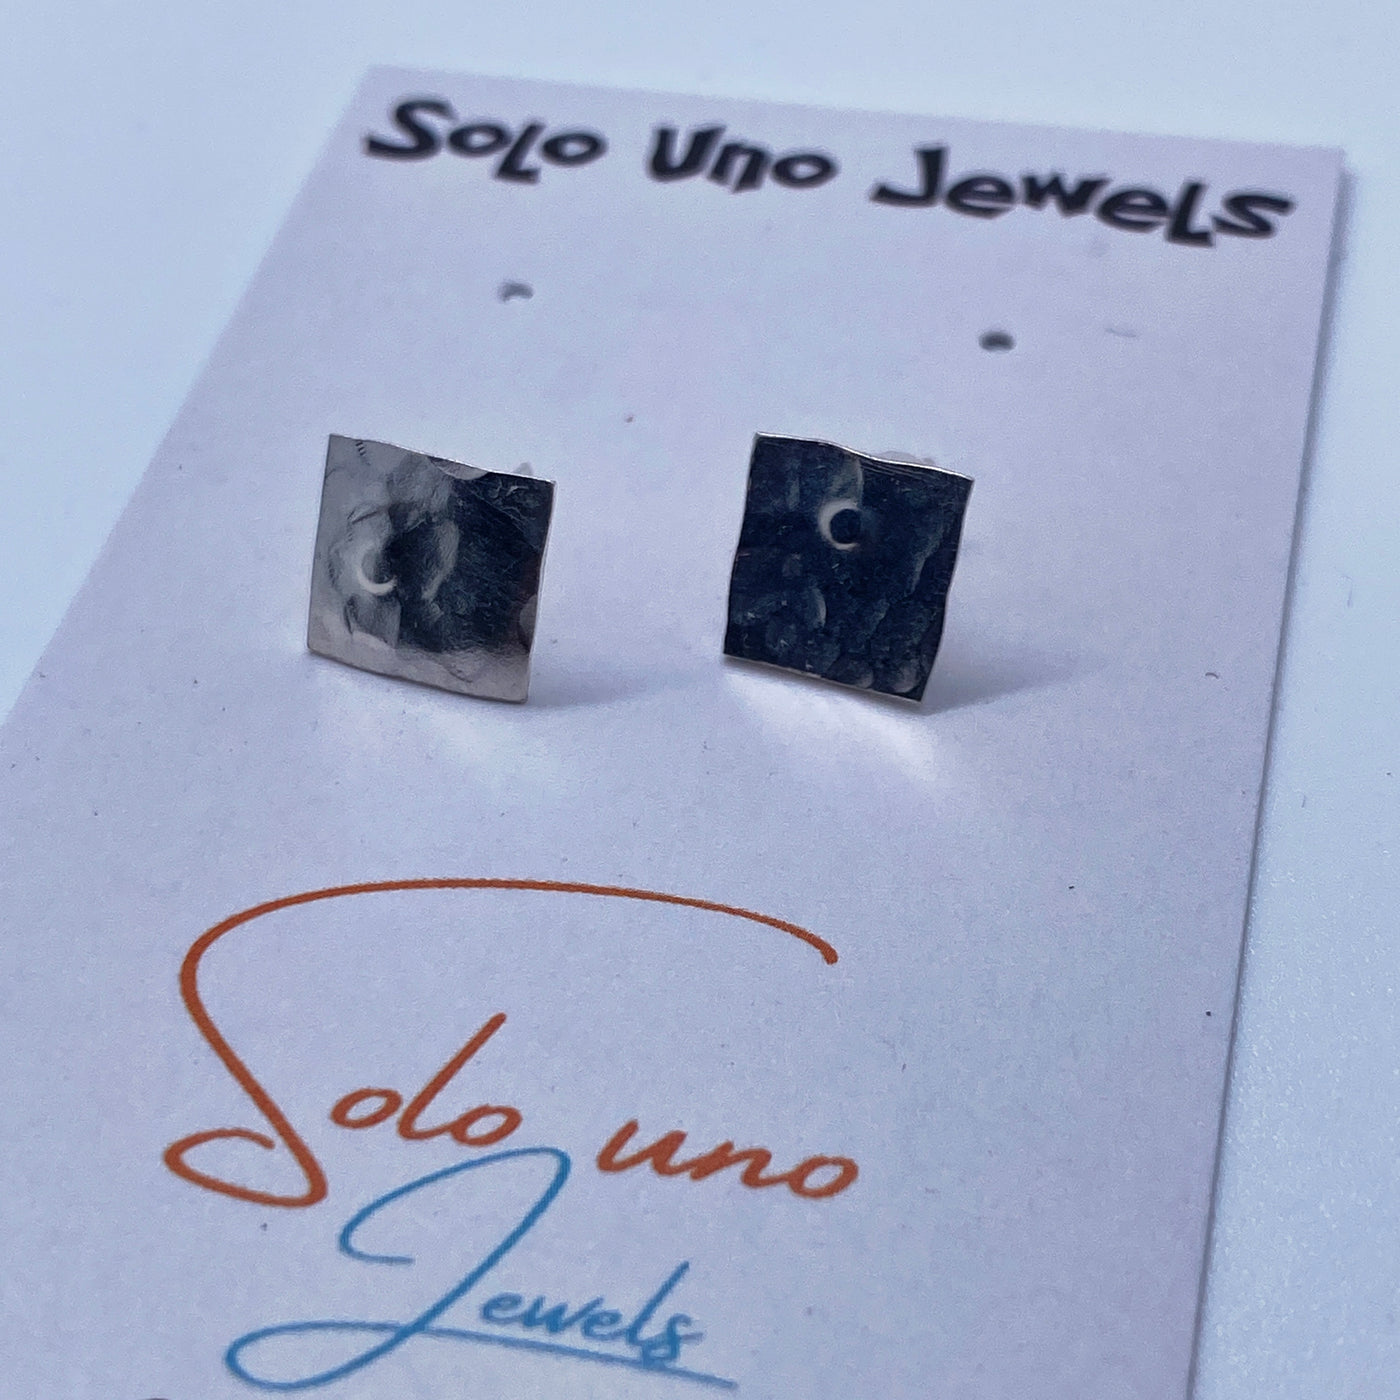 Square sterling texturized silver studs